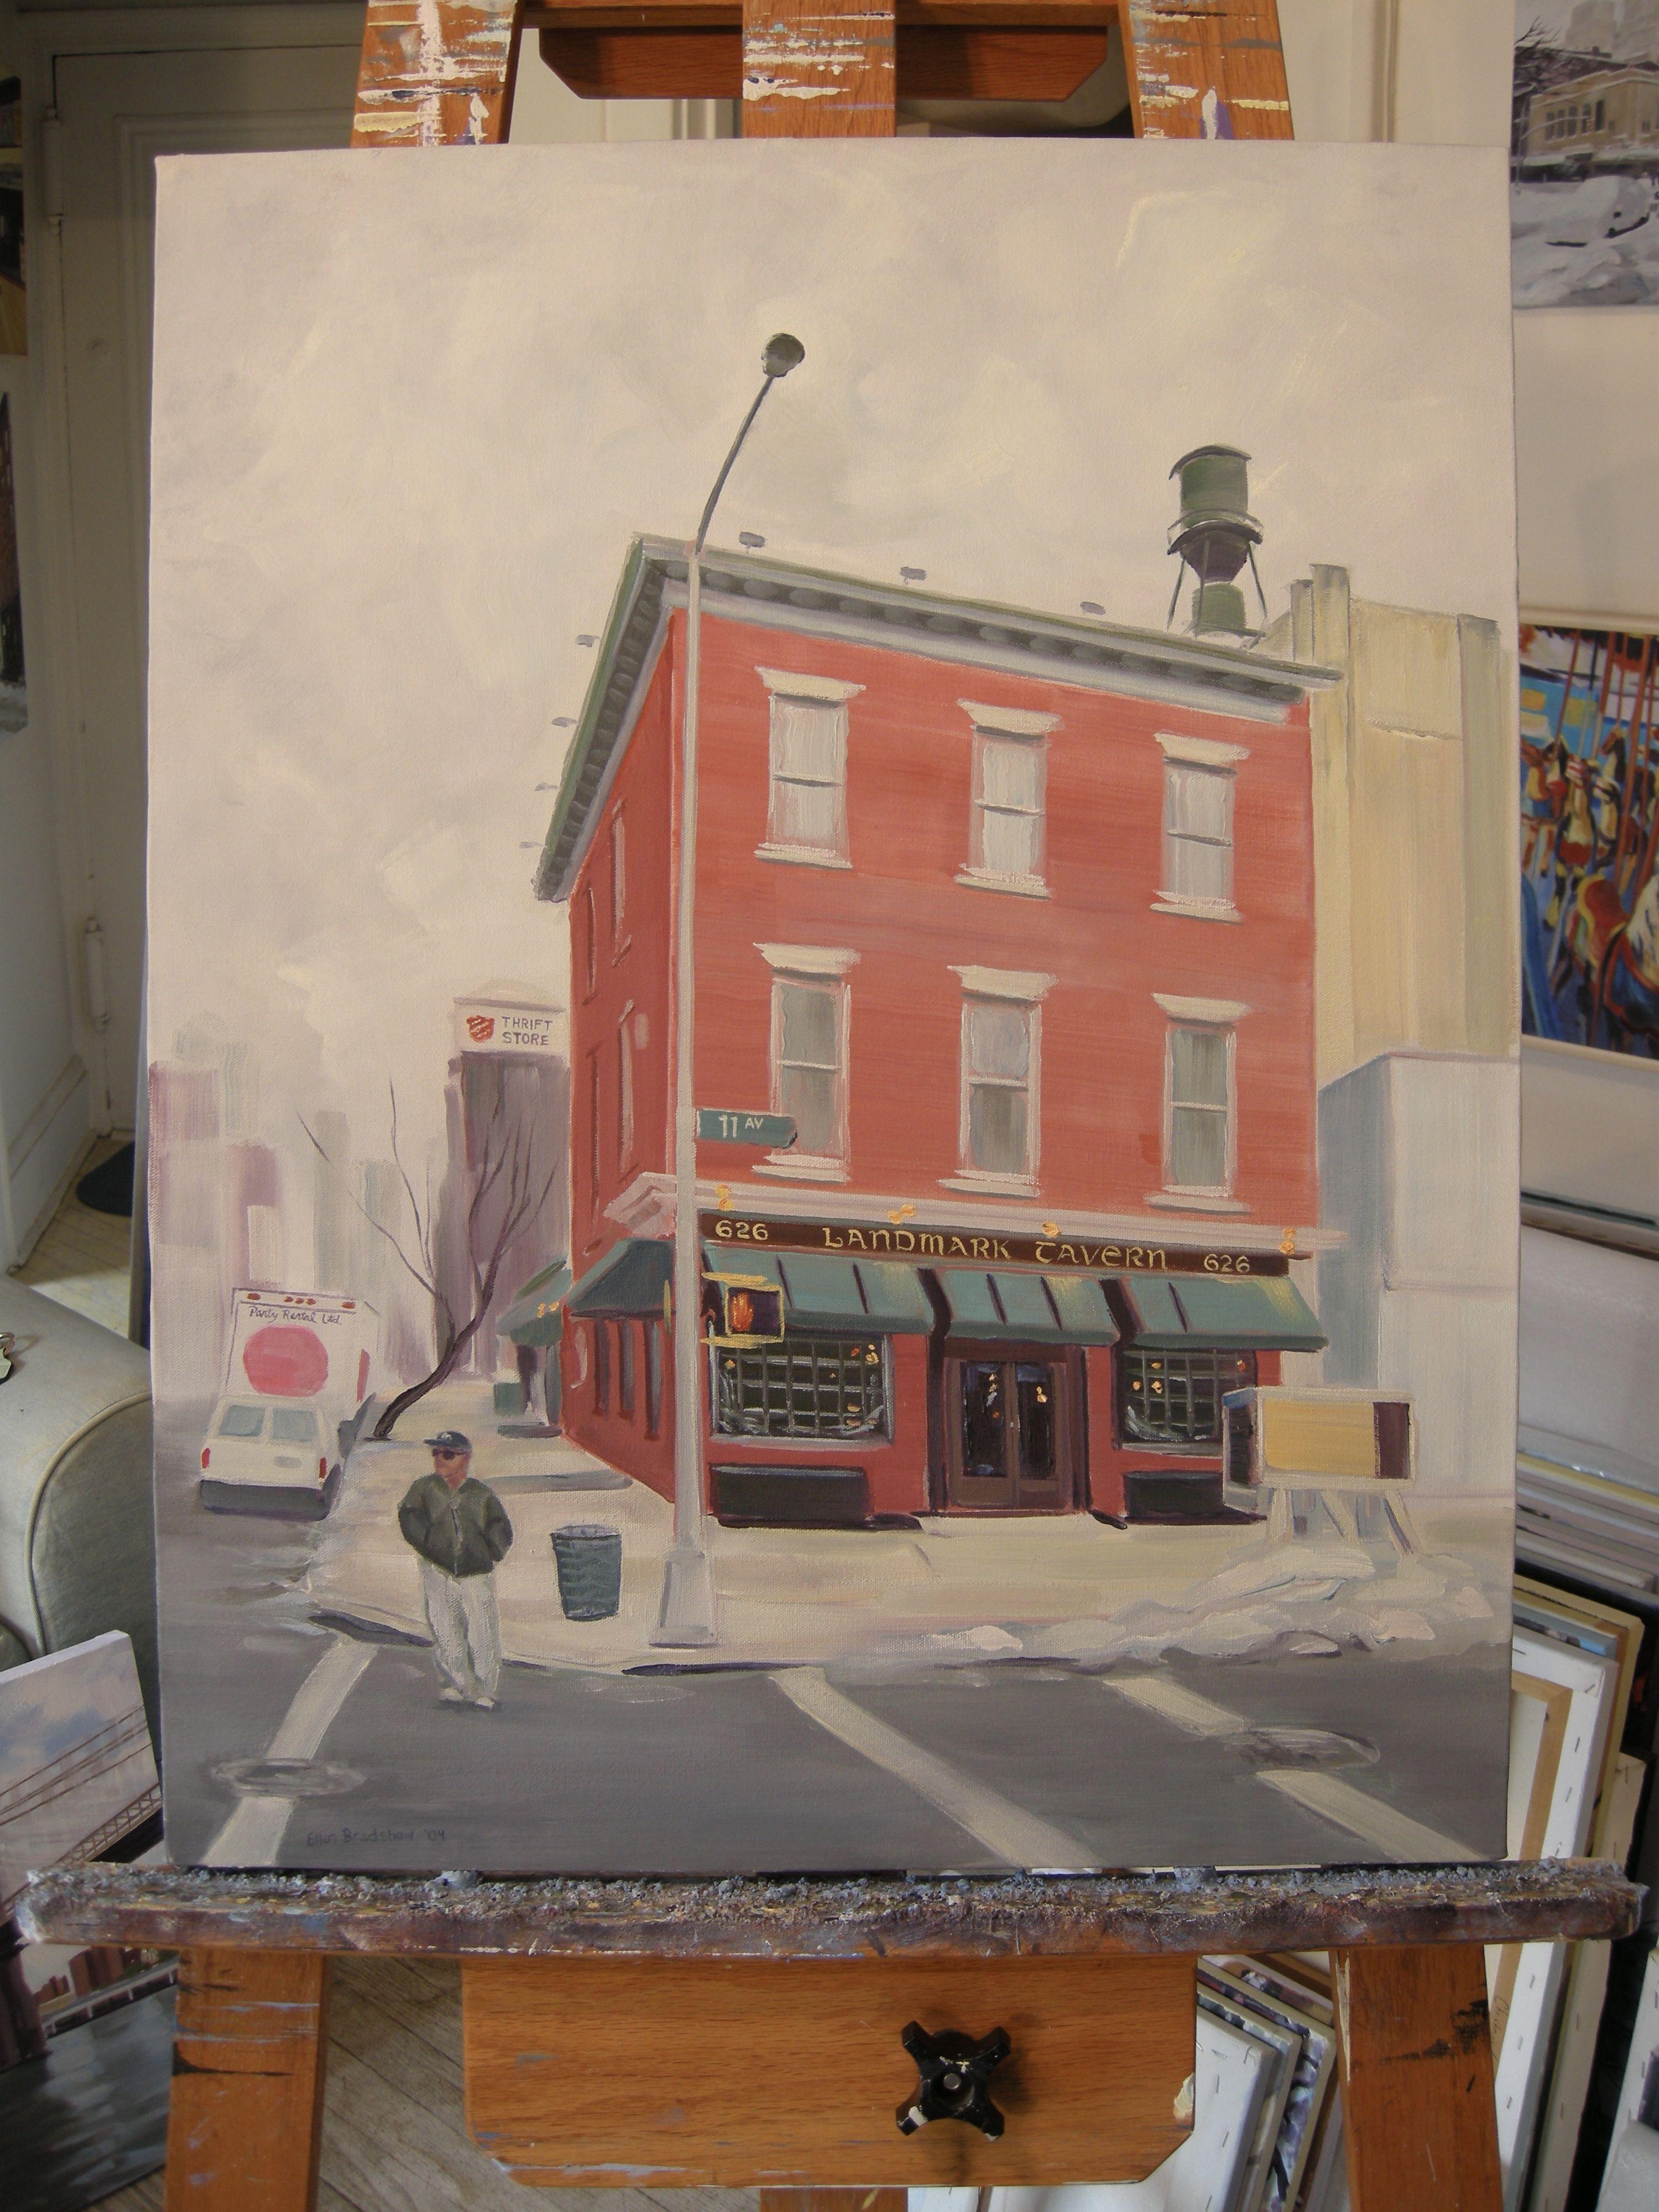 An Irish Waterfront saloon from 1868 on 11th Avenue in Manhattan, still going strong! From my series on the oldest bar/taverns in Manhattan. I liked the moody grey feel to the day against the welcoming lights within! :: Painting :: Realism :: This